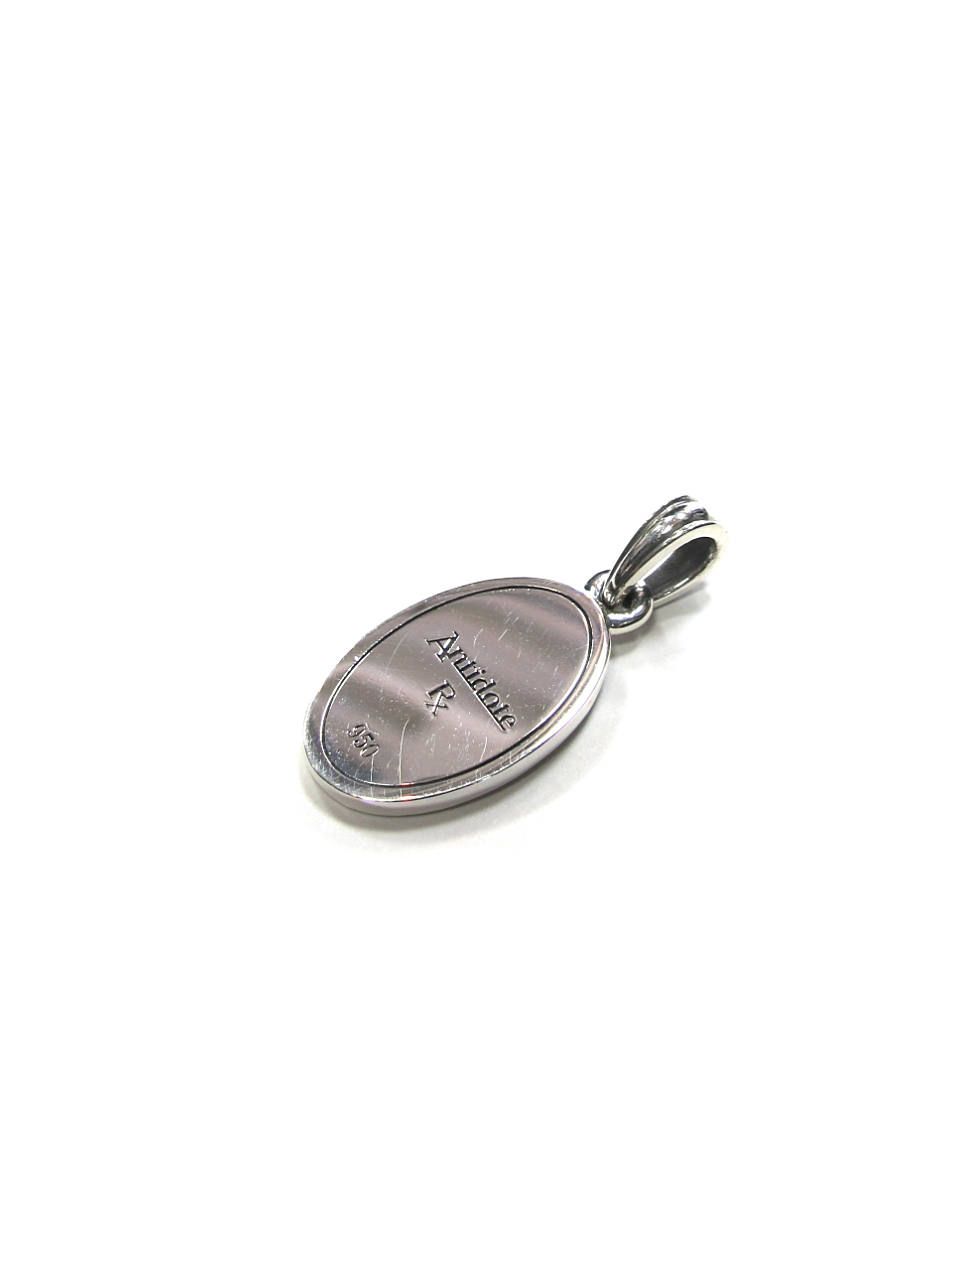 ANTIDOTE   Engraved Plate Pendant クロスセット巾着は付属しないので